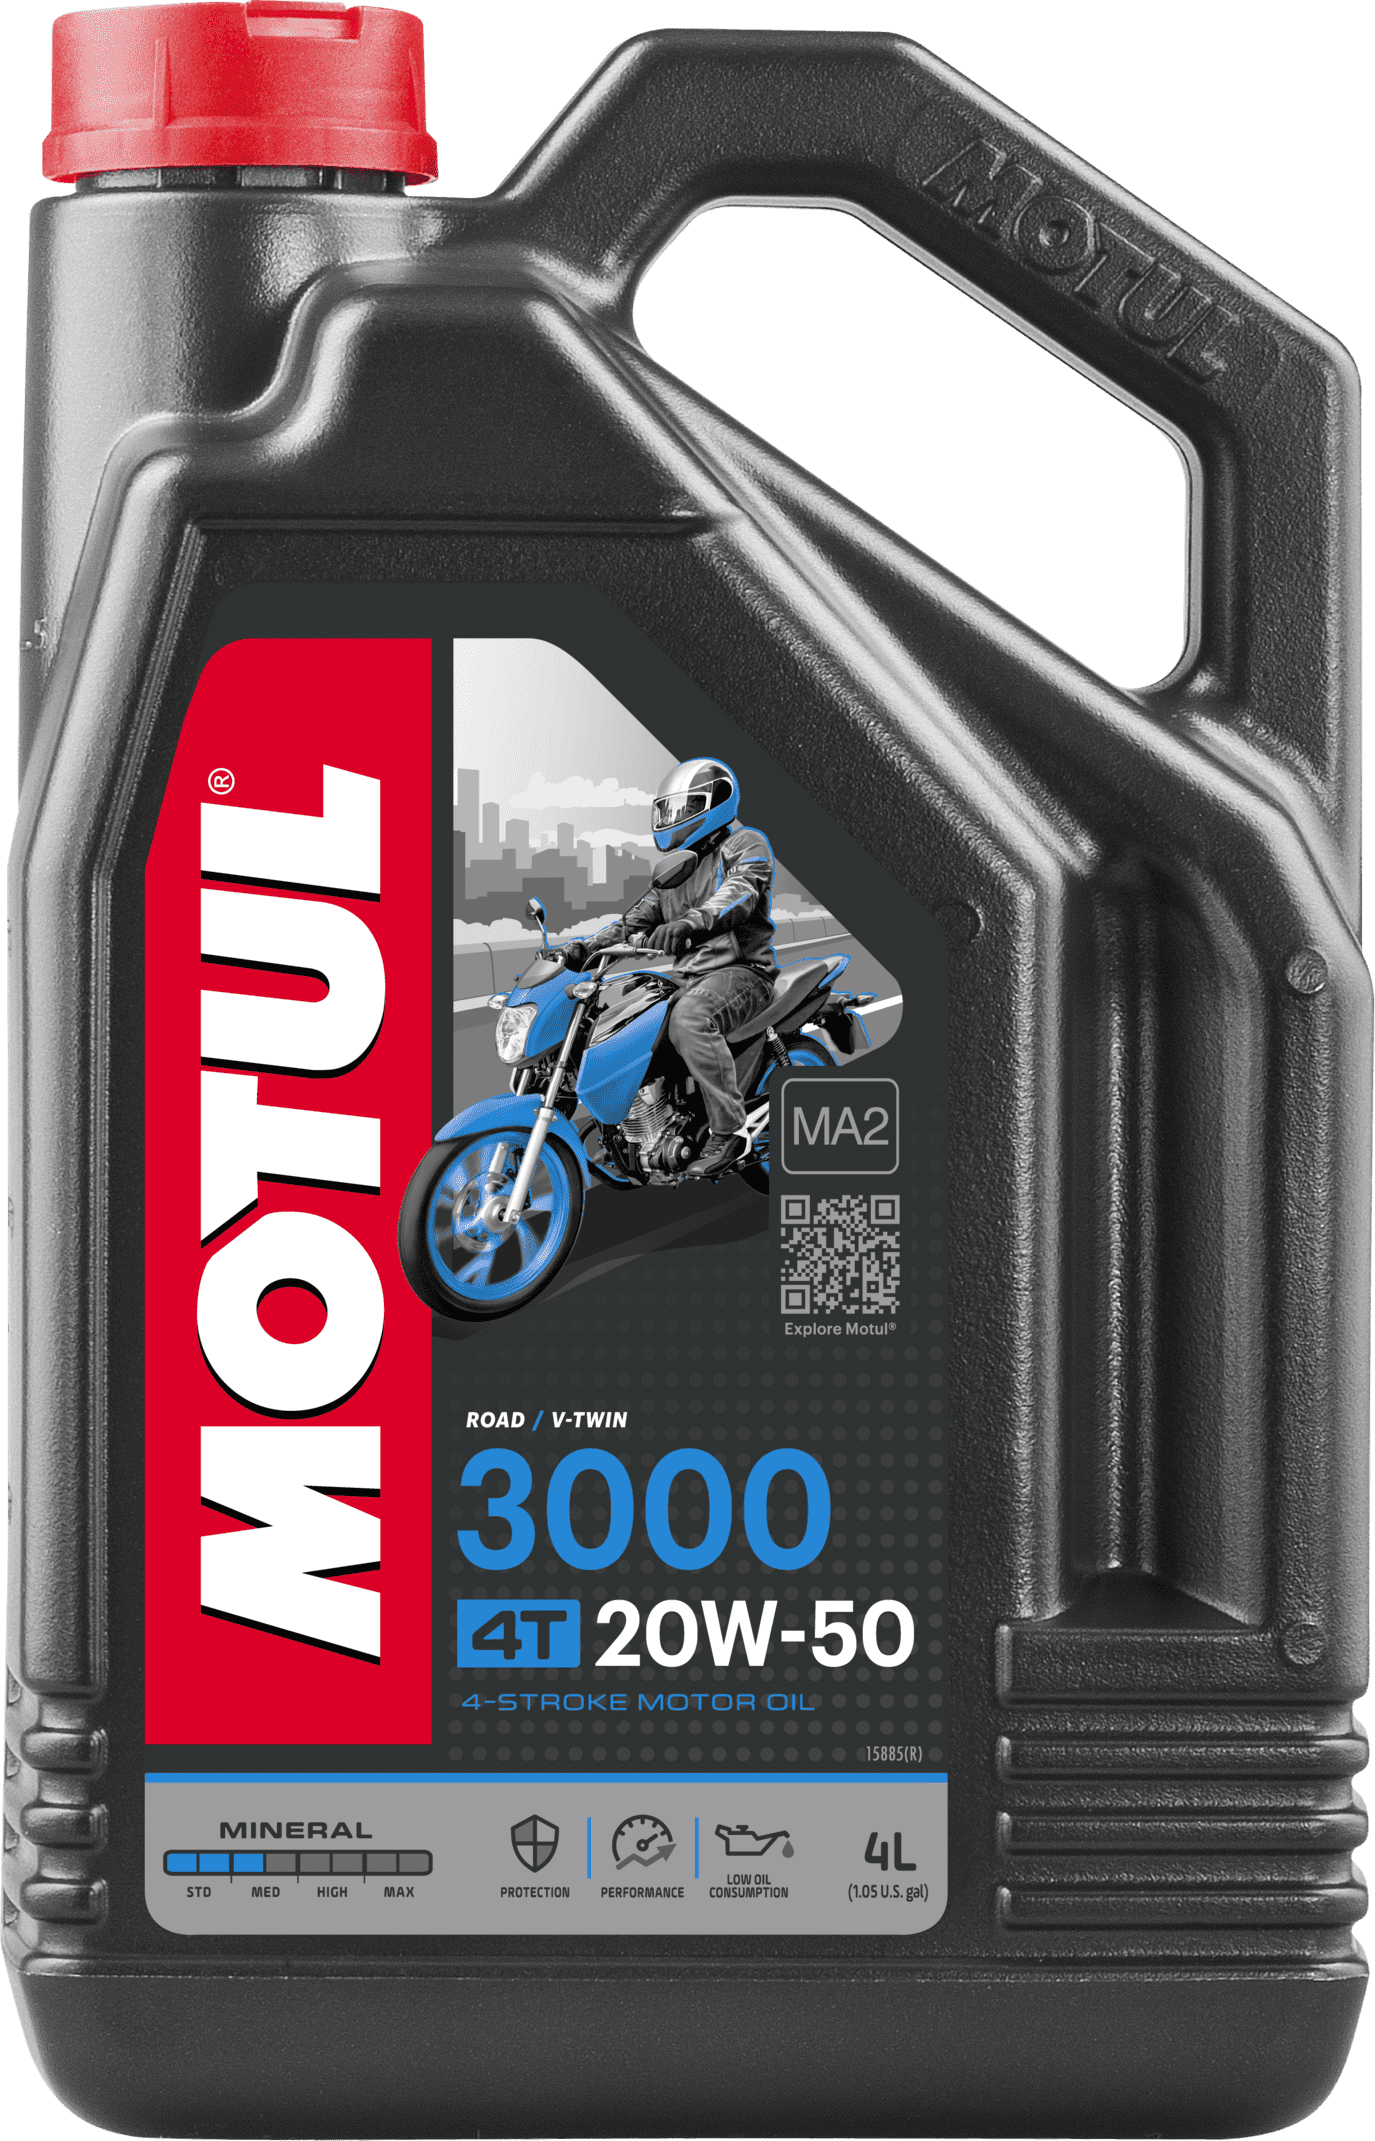 107319-4 Mineral engine lubricant. This product is specially designed for street & road bikes, trails, off-road bikes among others fitted with 4 Stroke engines with integrated gearbox or not and wet or dry clutch requiring API SL standards.